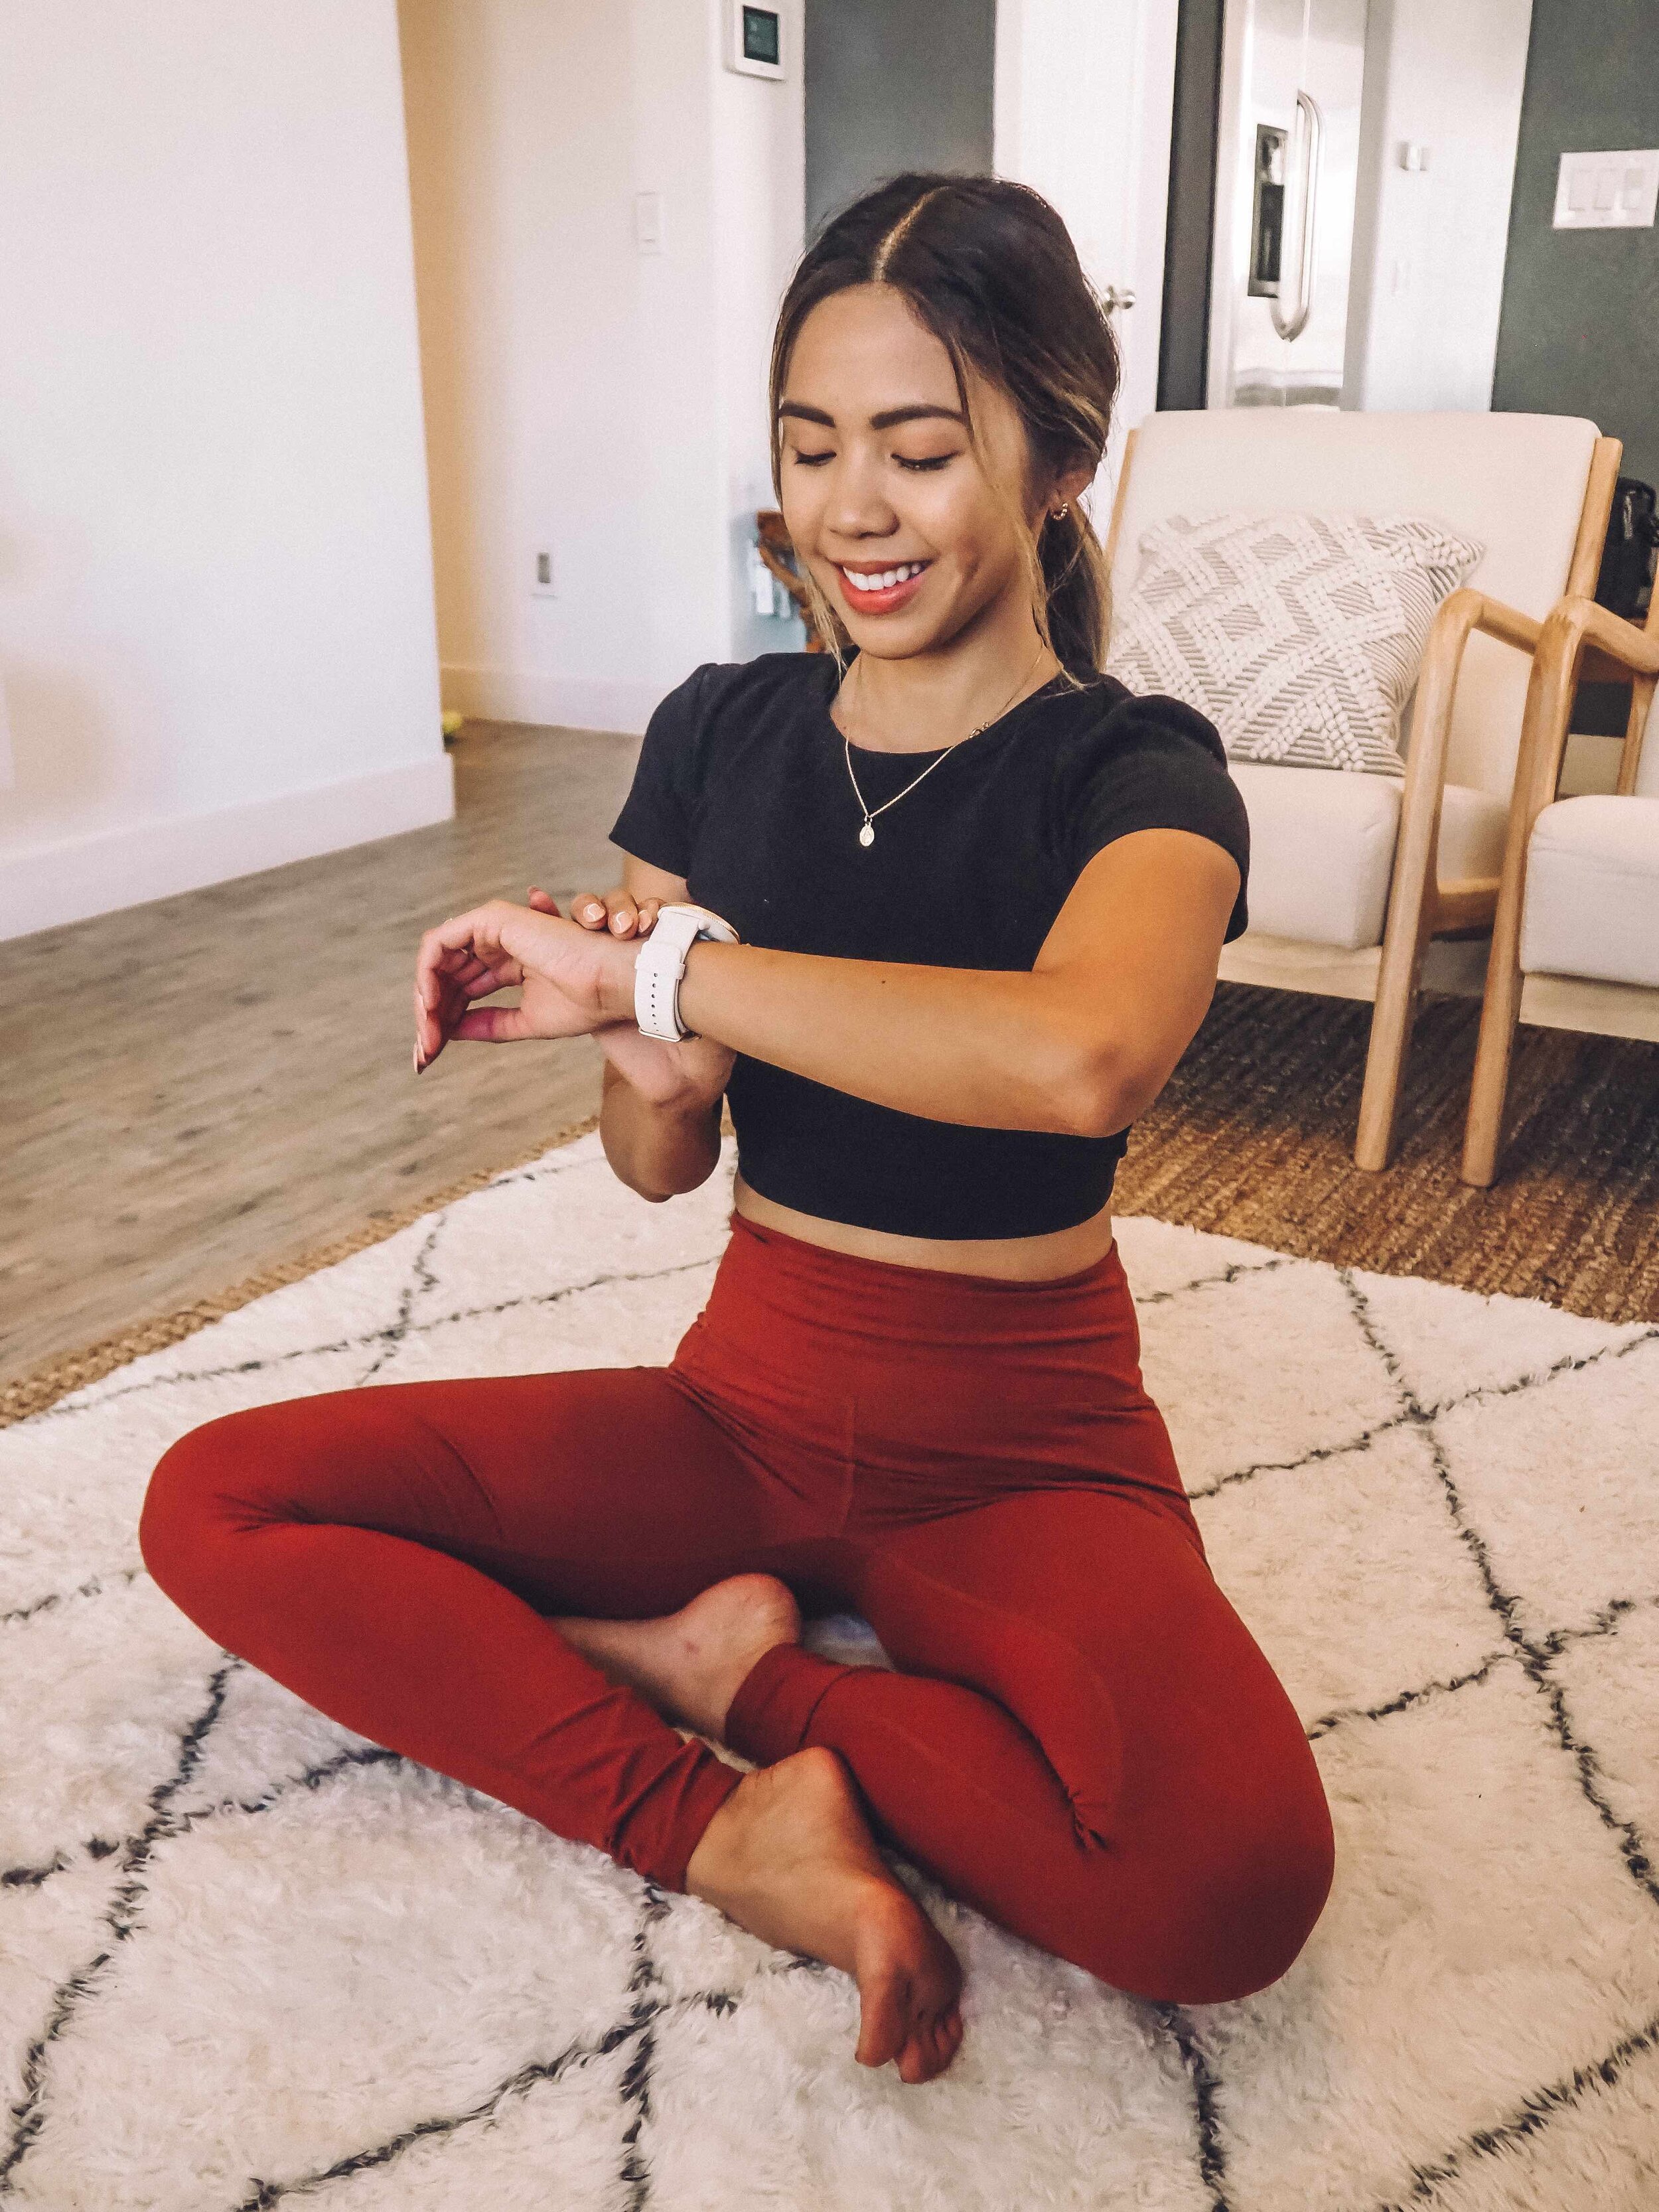 My Healthy Morning Routine x Polar Ignite 2 Fitness Watch — When